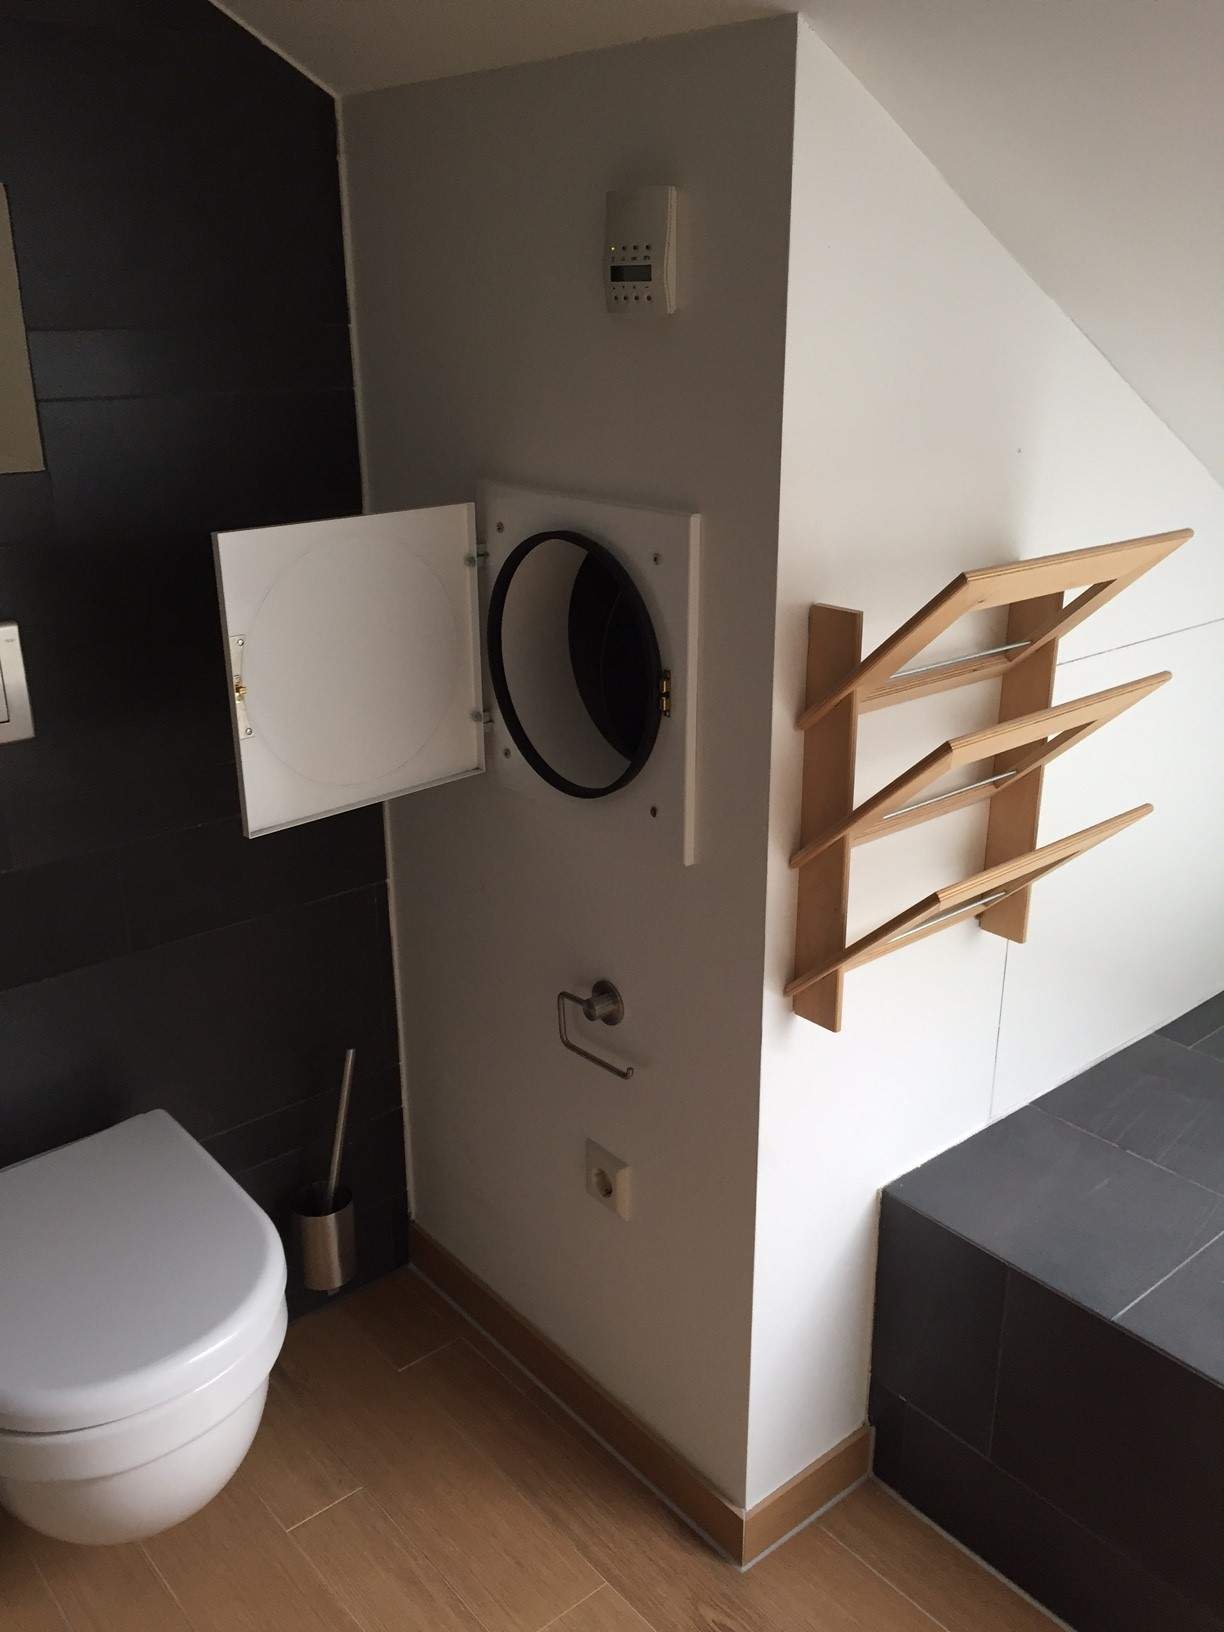 A completed laundry chute inside a bathroom